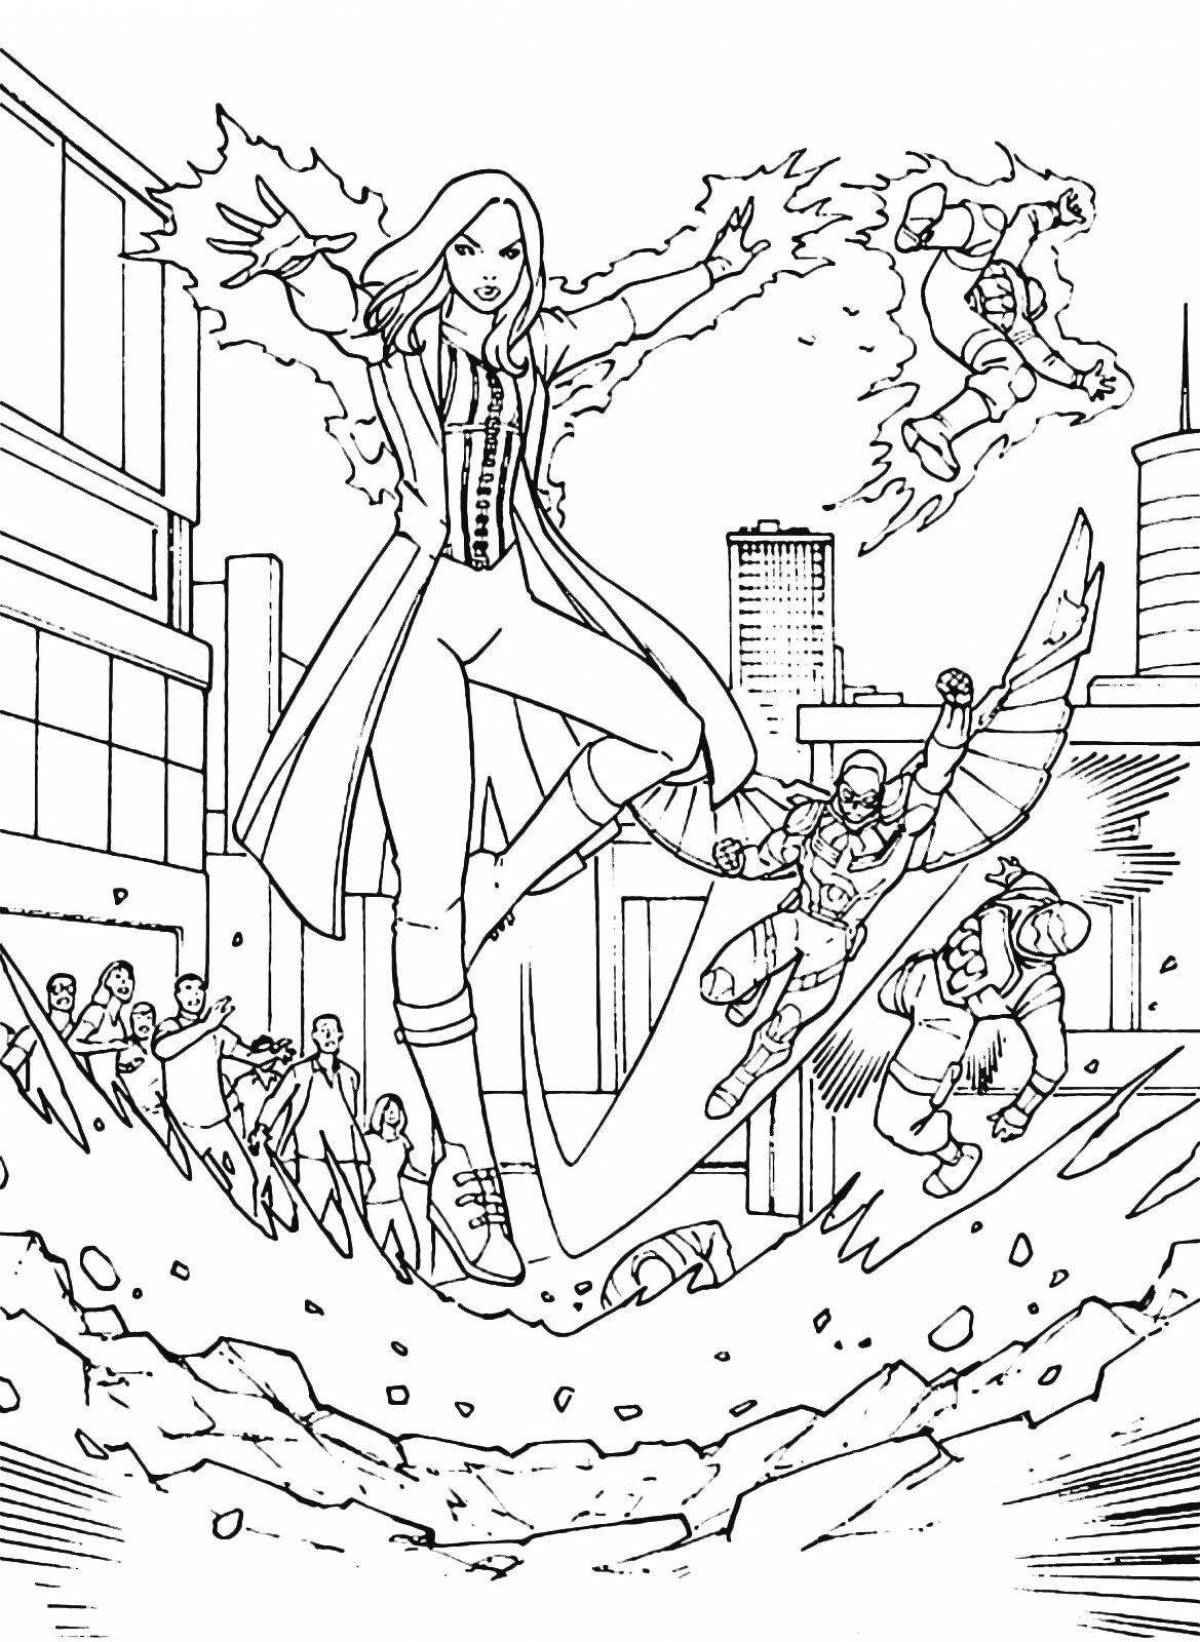 Charm scarlet witch coloring book